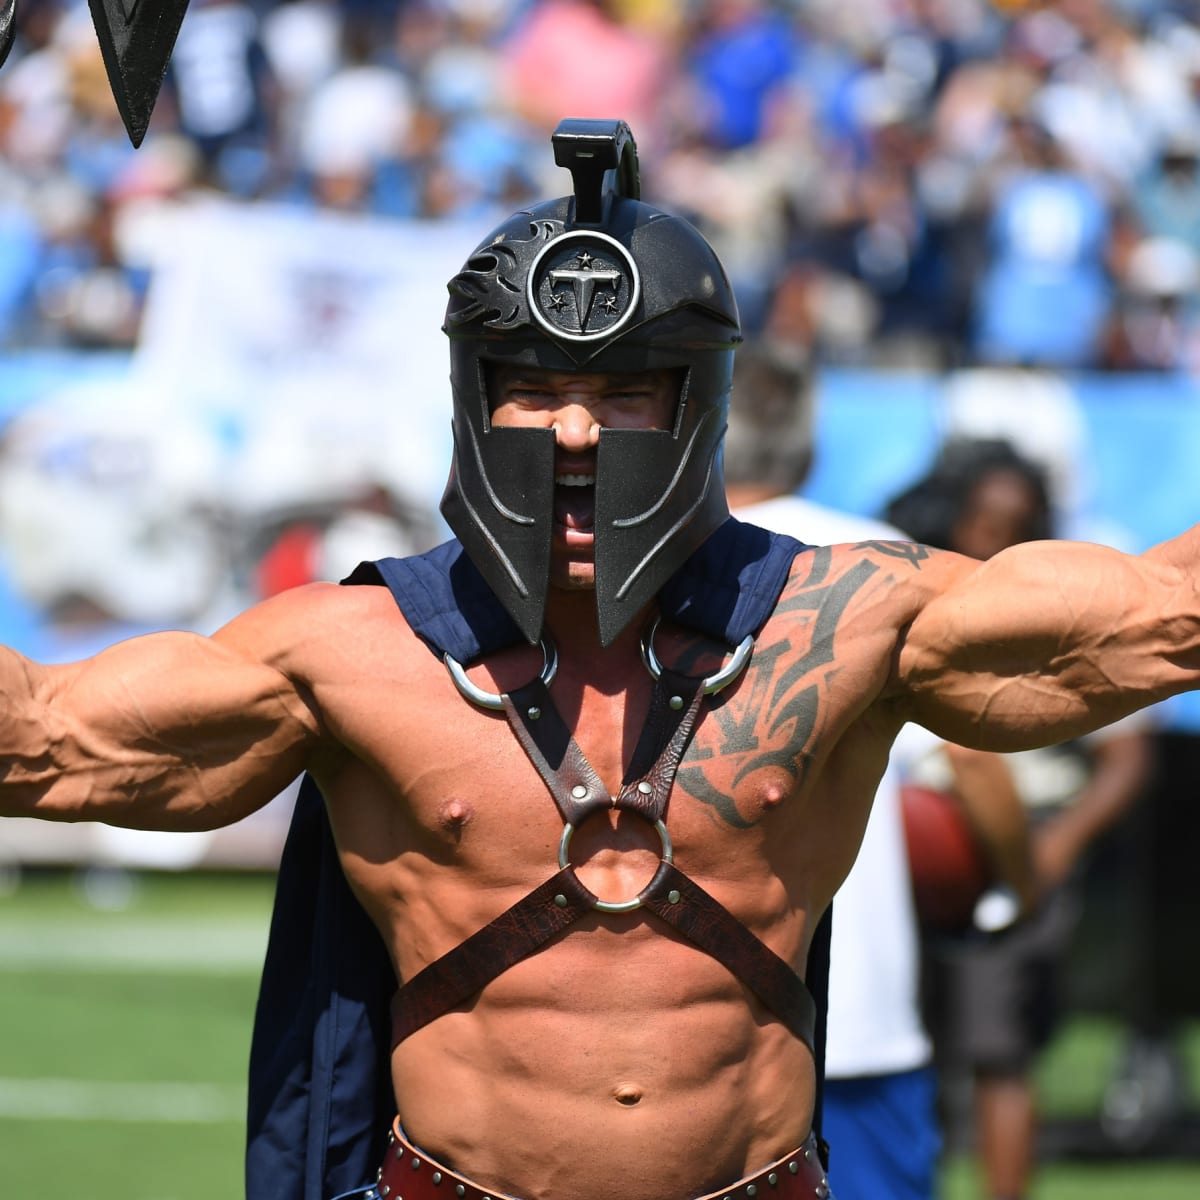 Tennessee Titans Mascot Made It To NBC Show The Titan Games - Sports  Illustrated Tennessee Titans News, Analysis and More